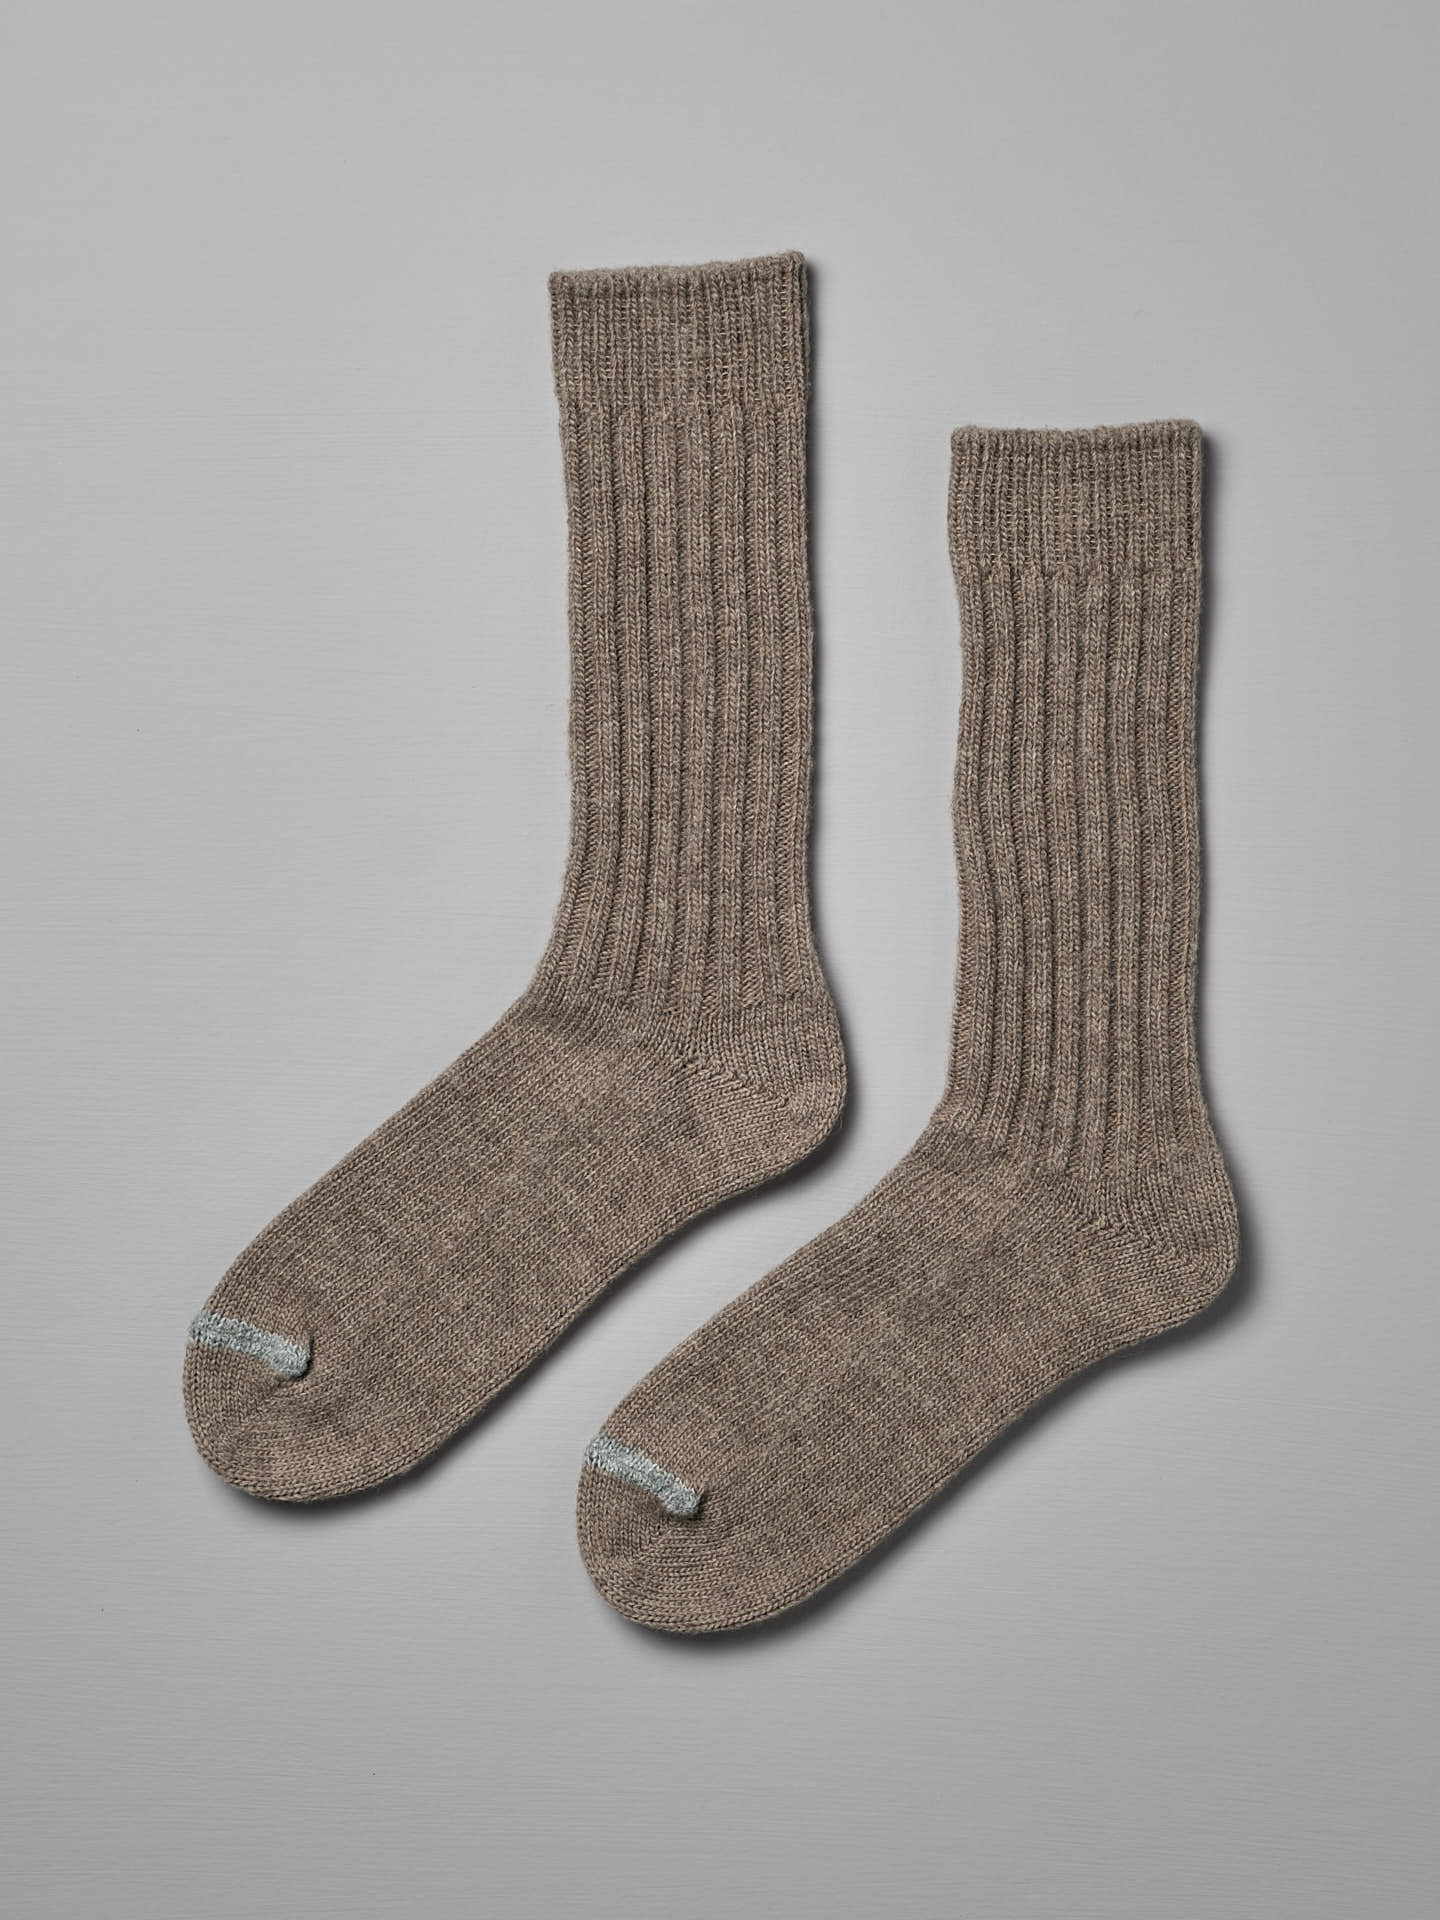 A pair of Praha Wool Ribbed Socks – Beige by Nishiguchi Kutsushita, displayed flat against a plain grey background. Both socks feature a small blue stripe near the toe area. Available in various sizes, including EUR and US (Men’s & Women's).